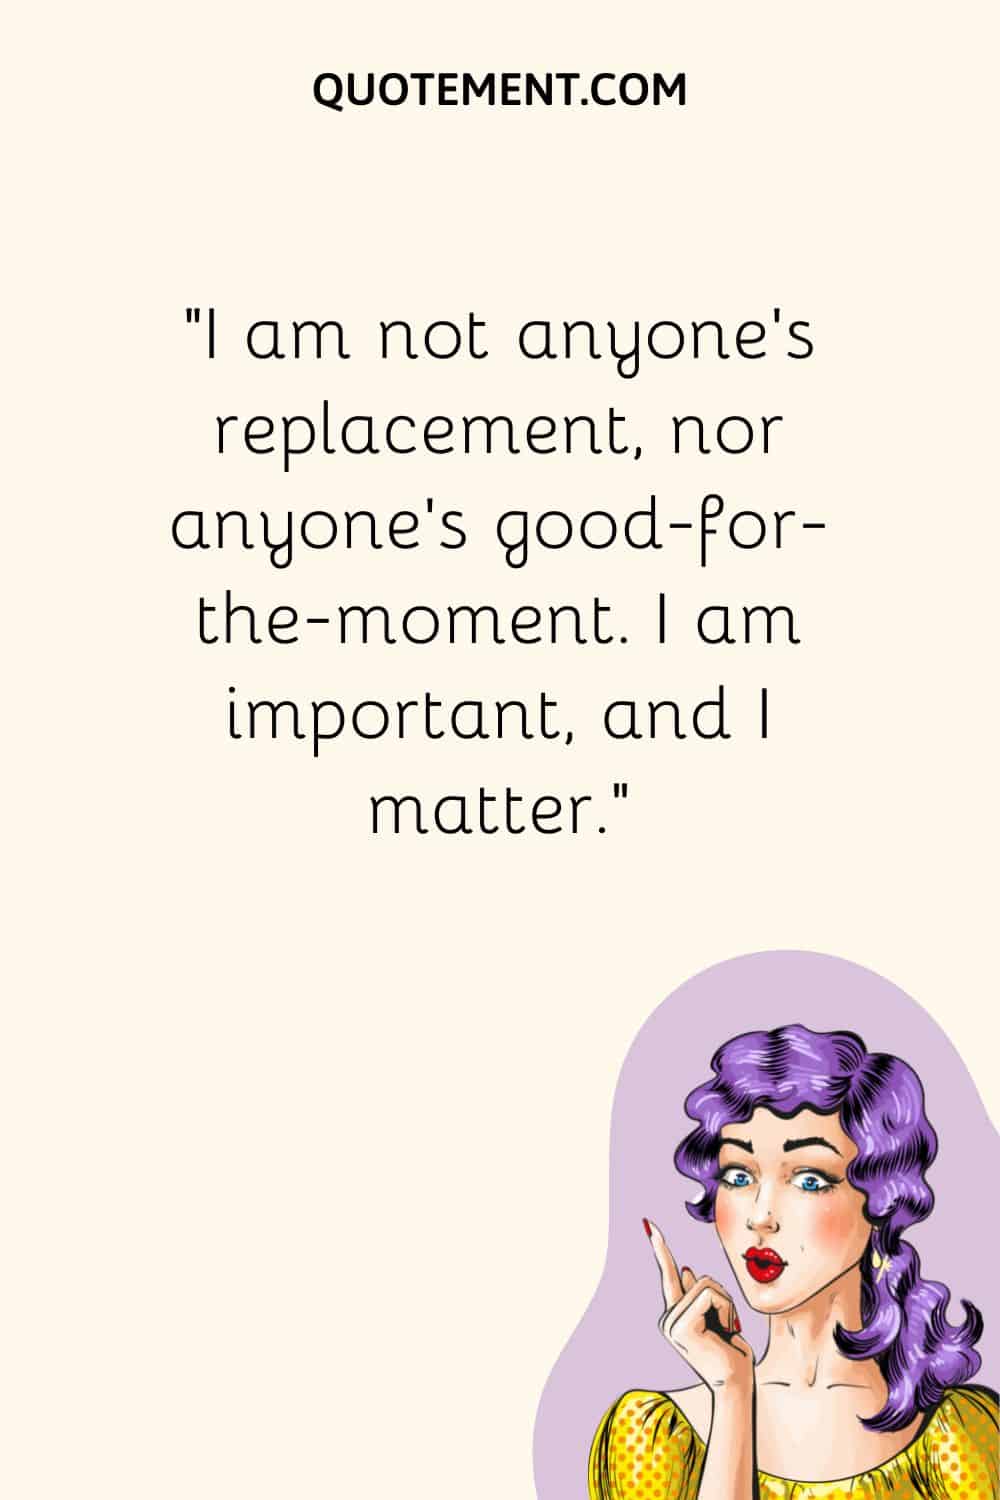 I am not anyone’s replacement